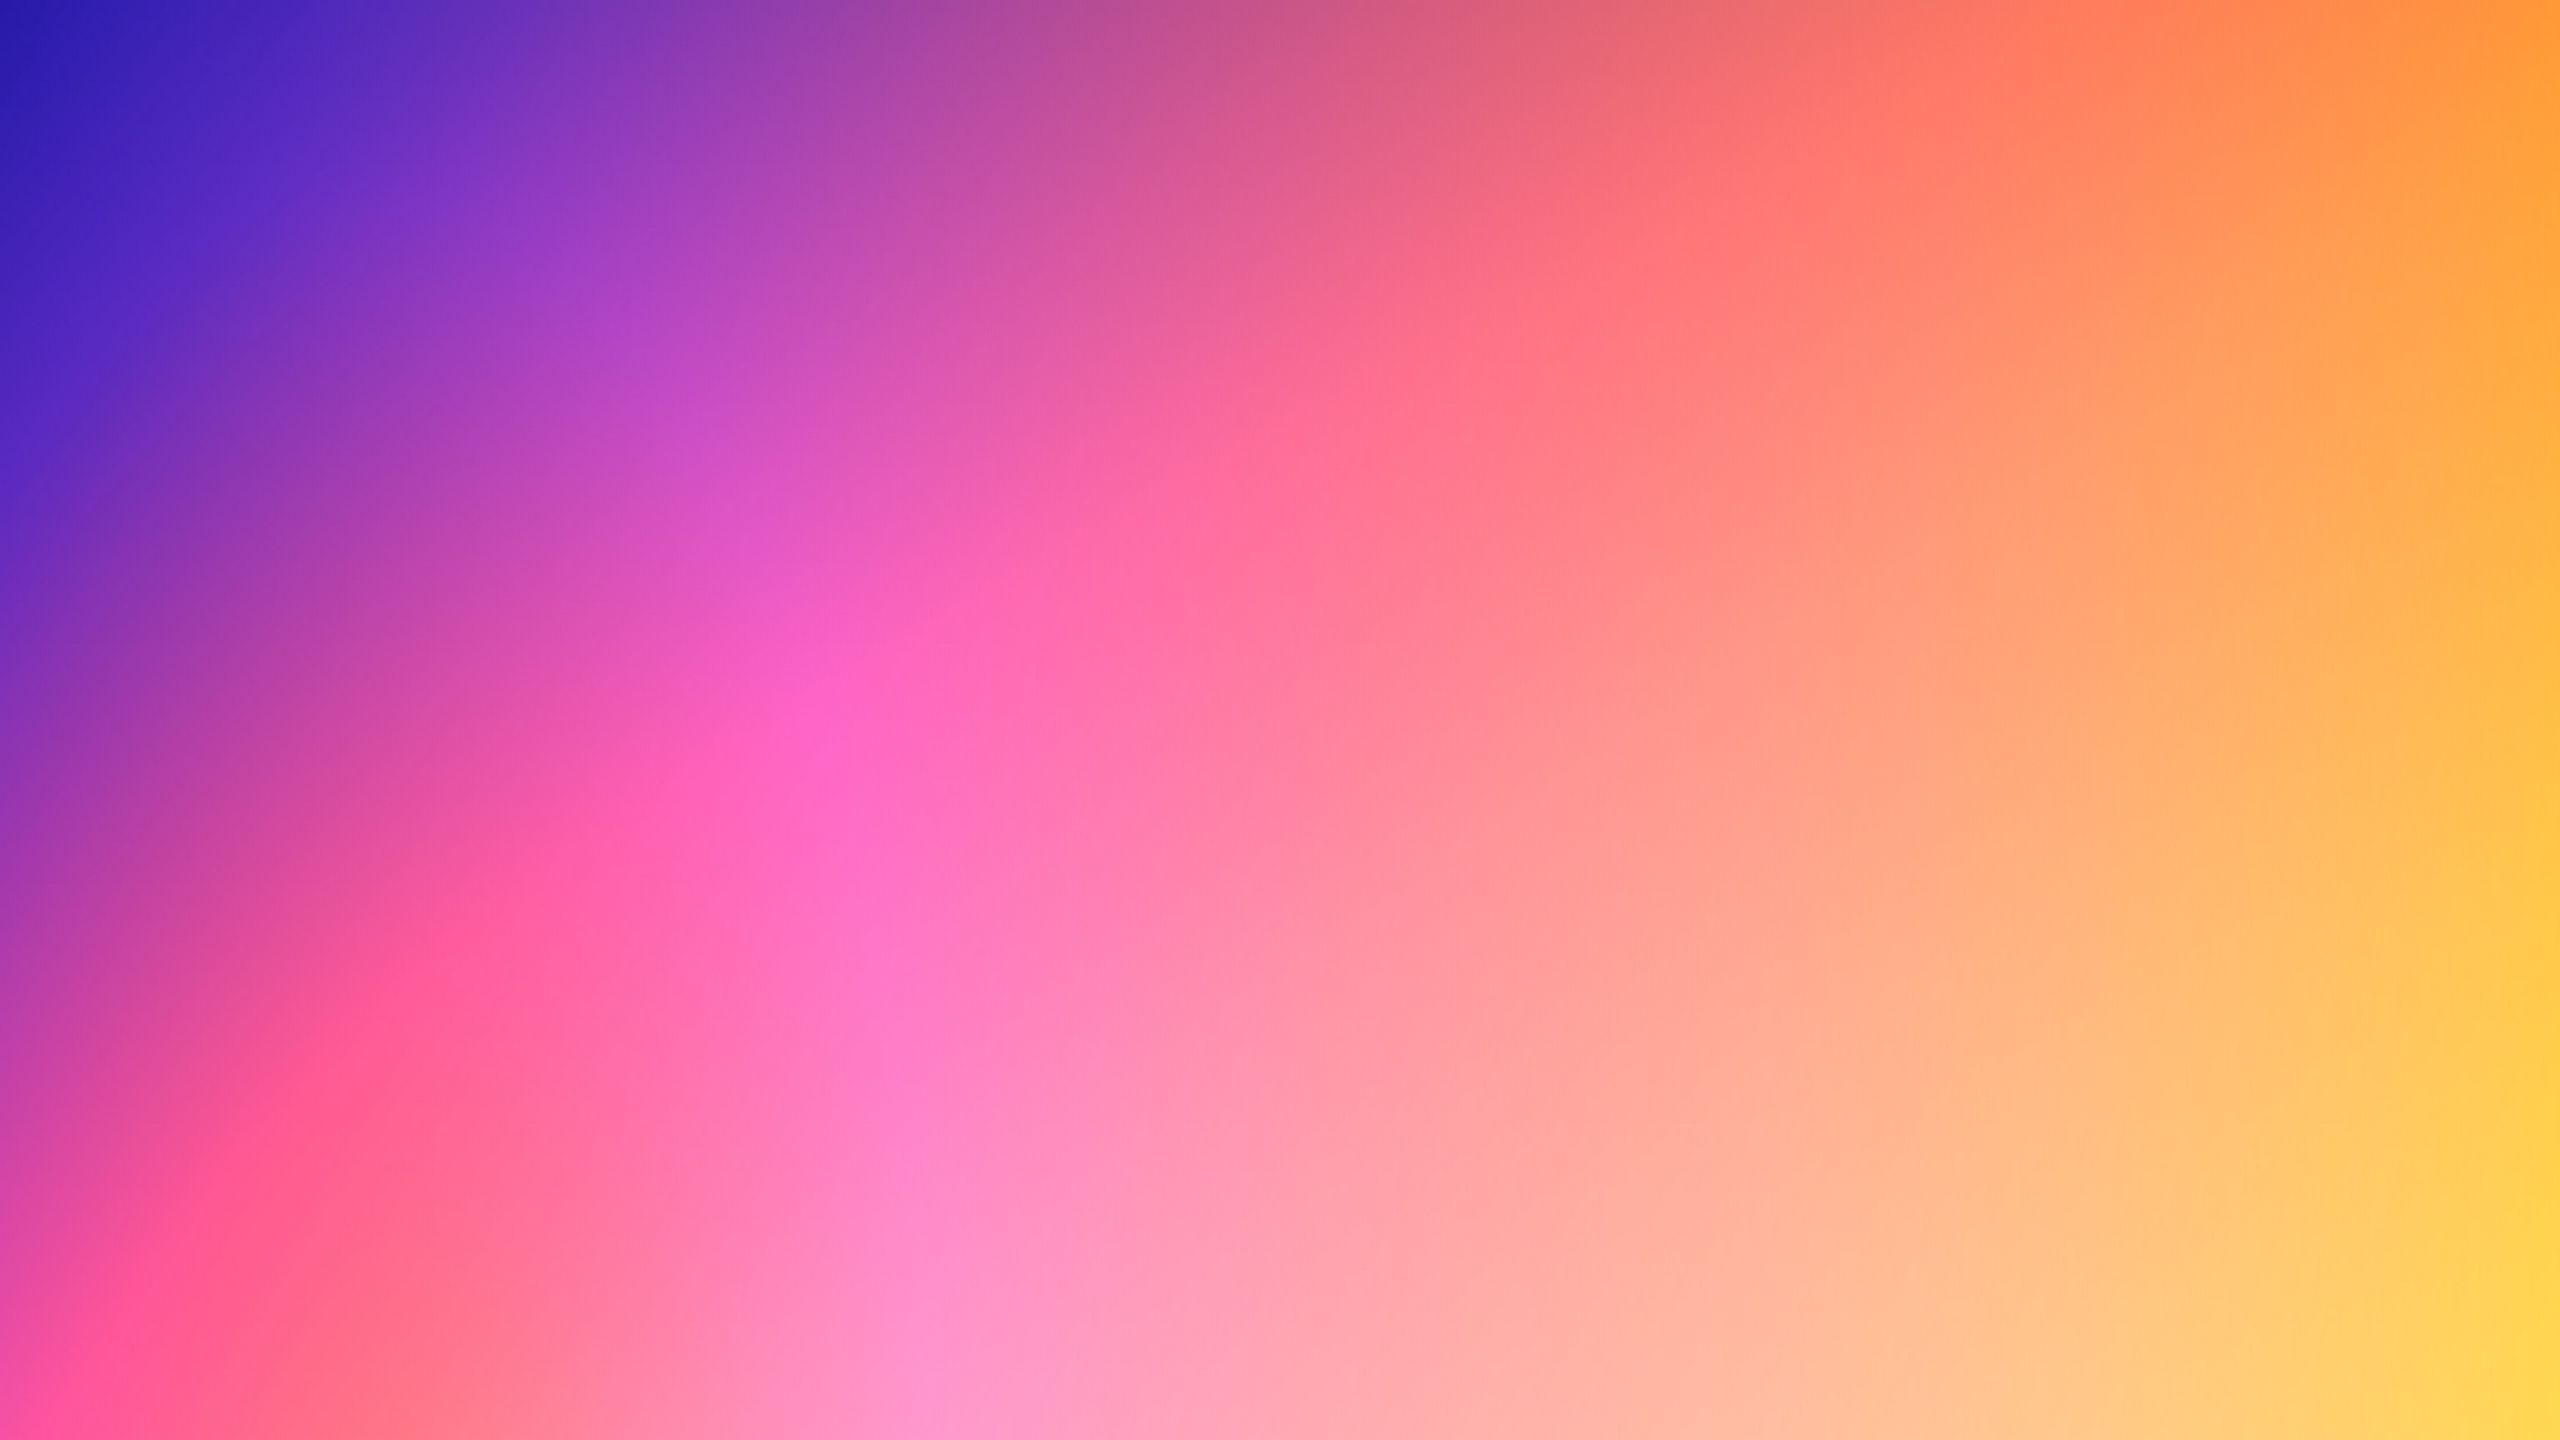 Download wallpaper 2560x1440 gradient, blur, abstraction, light, colorful  widescreen 16:9 hd background